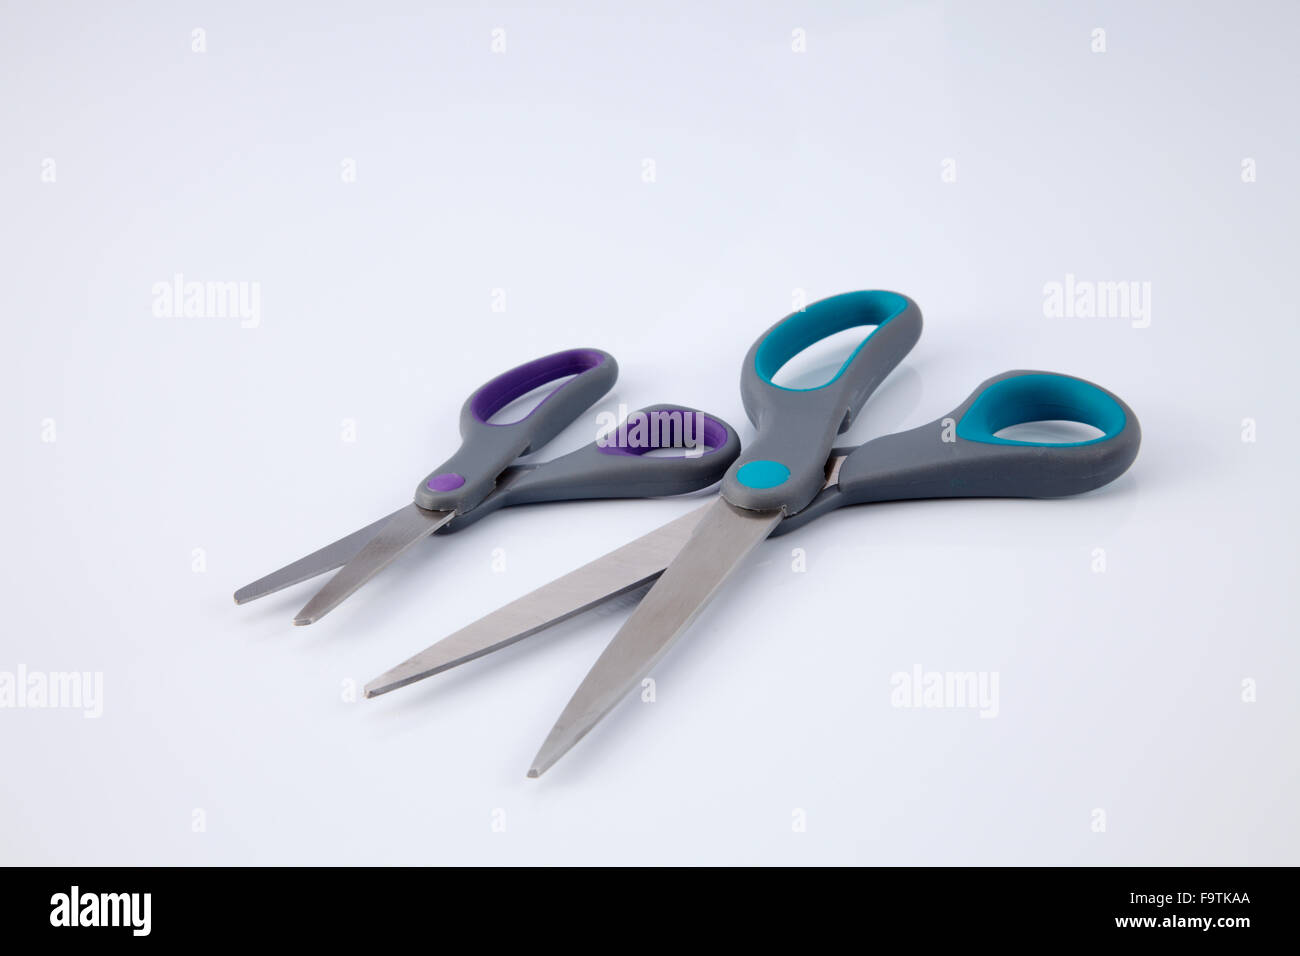 two pair of scissors which one big and small on the white background Stock Photo